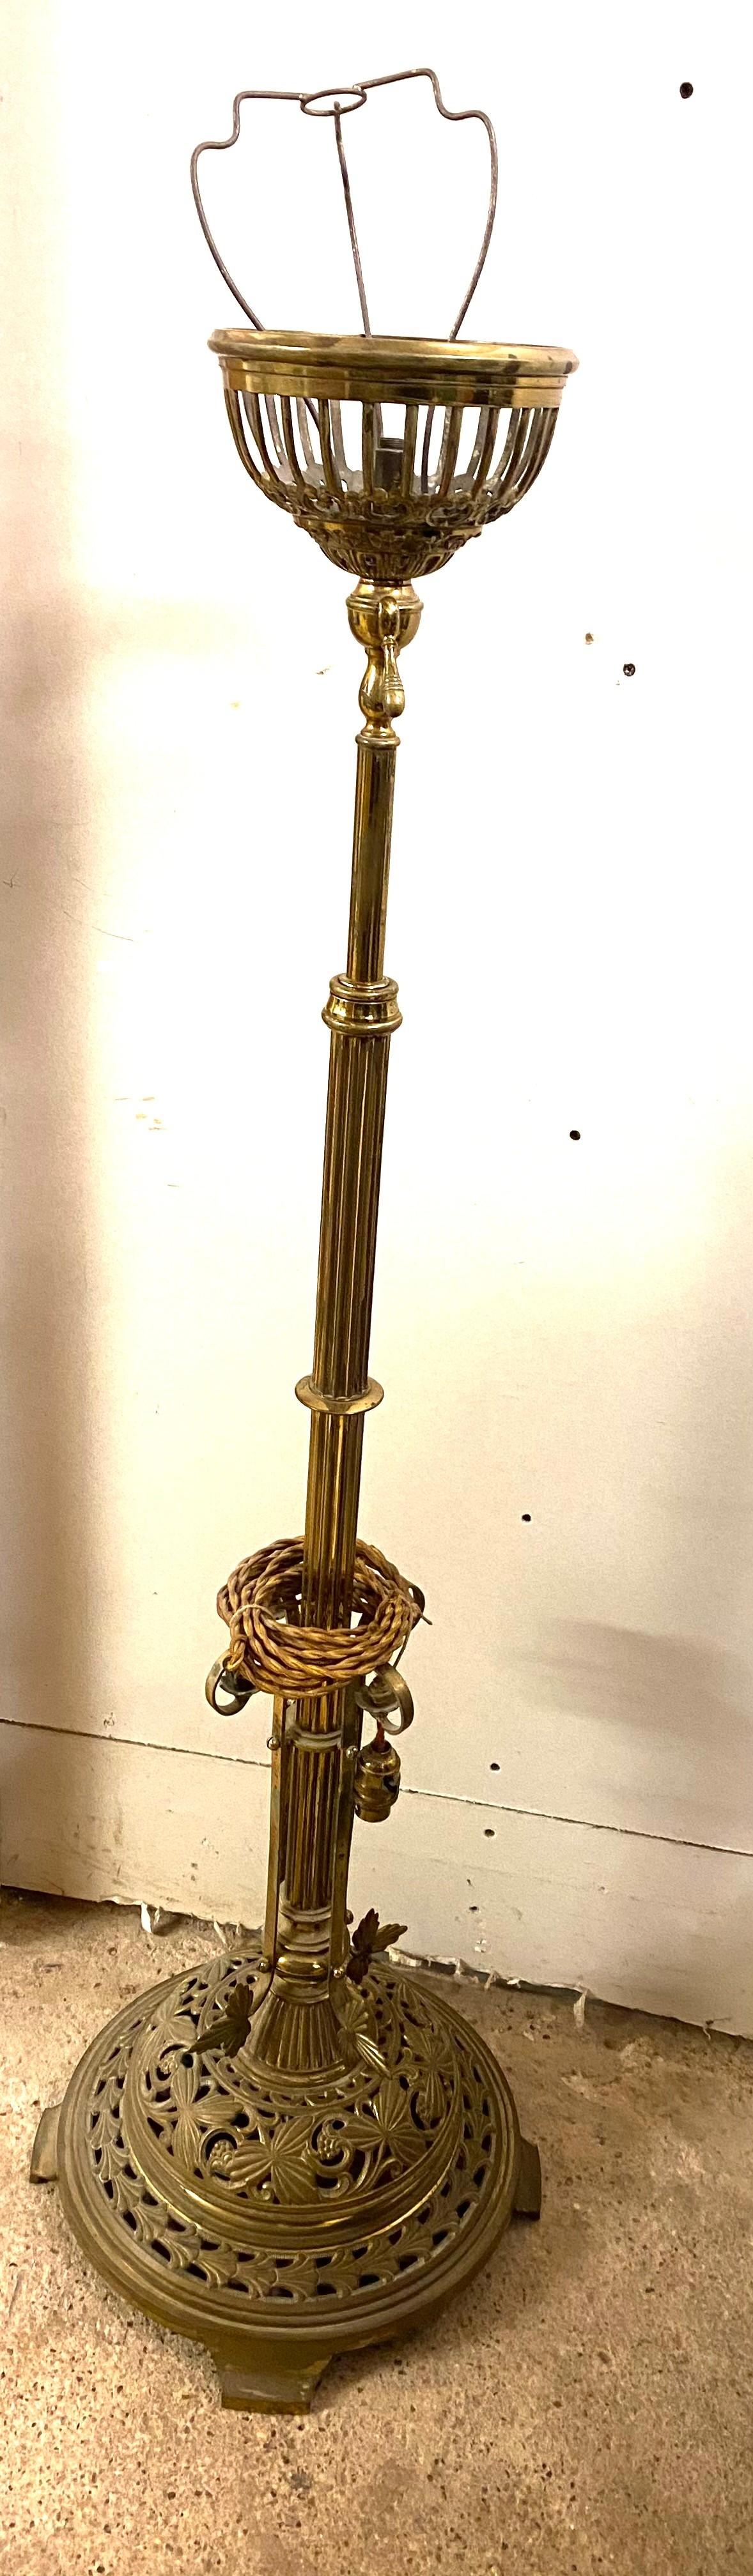 Victorian ornate telescopic oil lamp converted to electric, untested, some damage please view images - Image 2 of 9